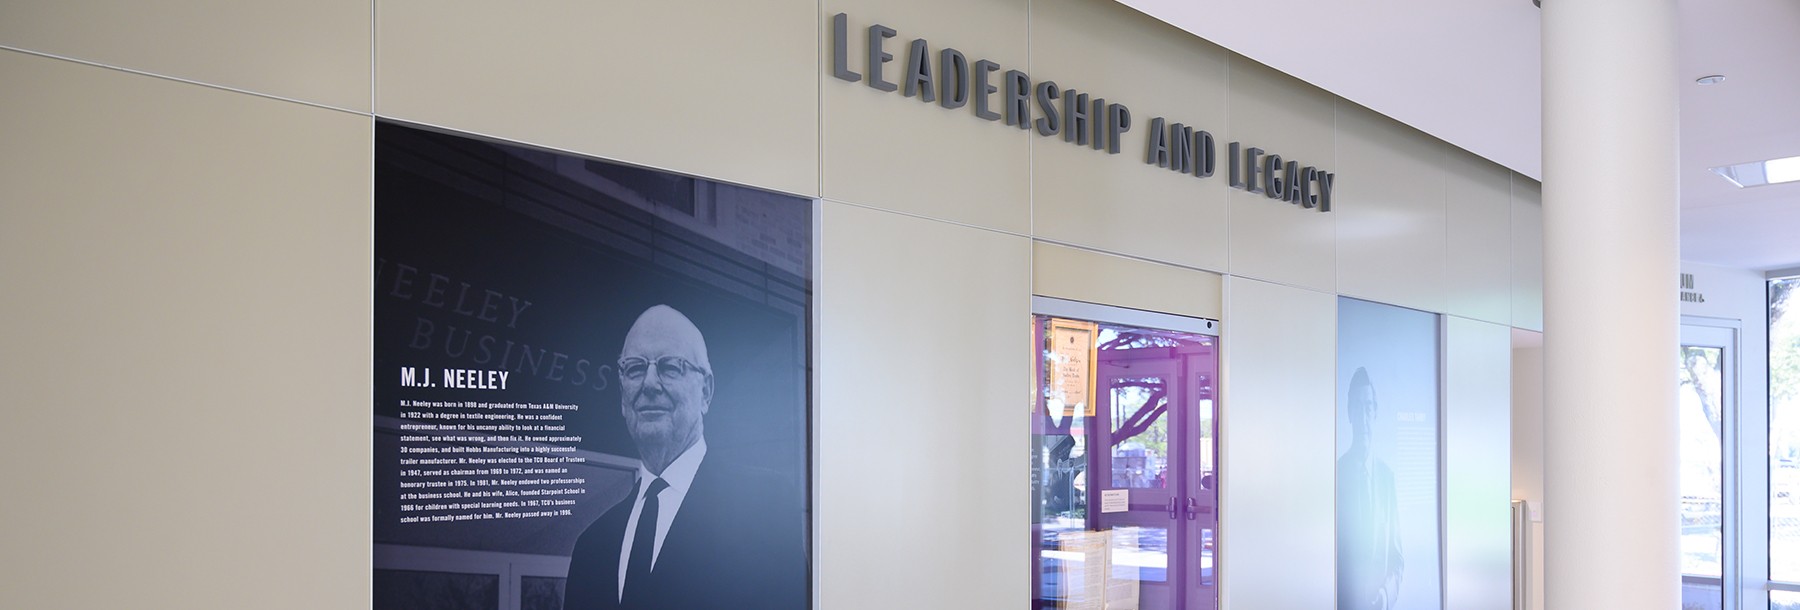 Section Image: Shaddock Foyer Leadership and Legacy 